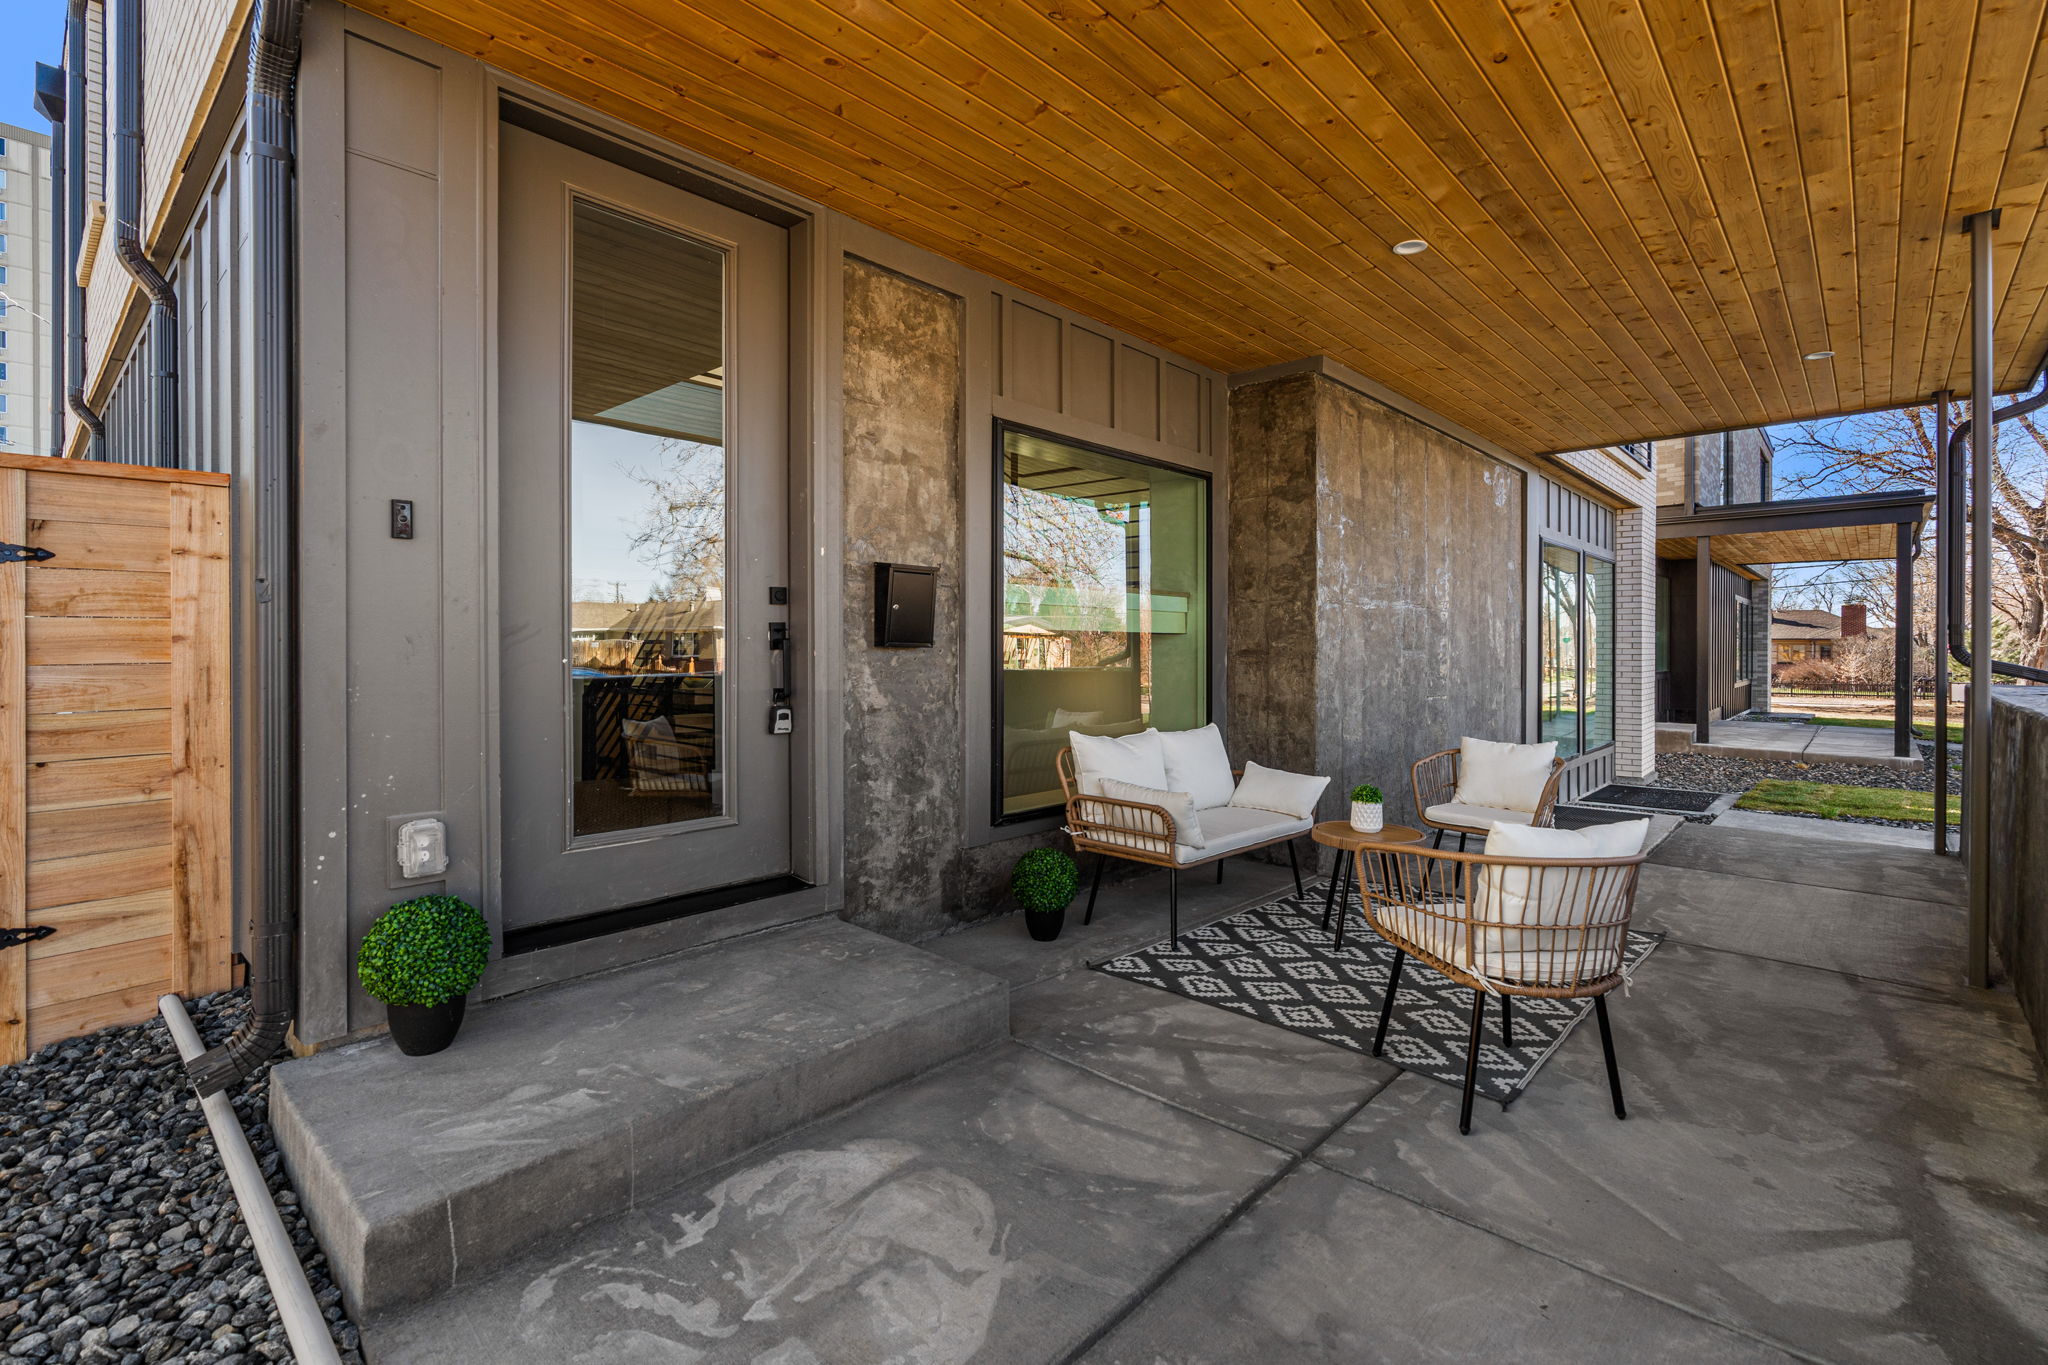 Enjoy socializing or relaxing on the covered front porch